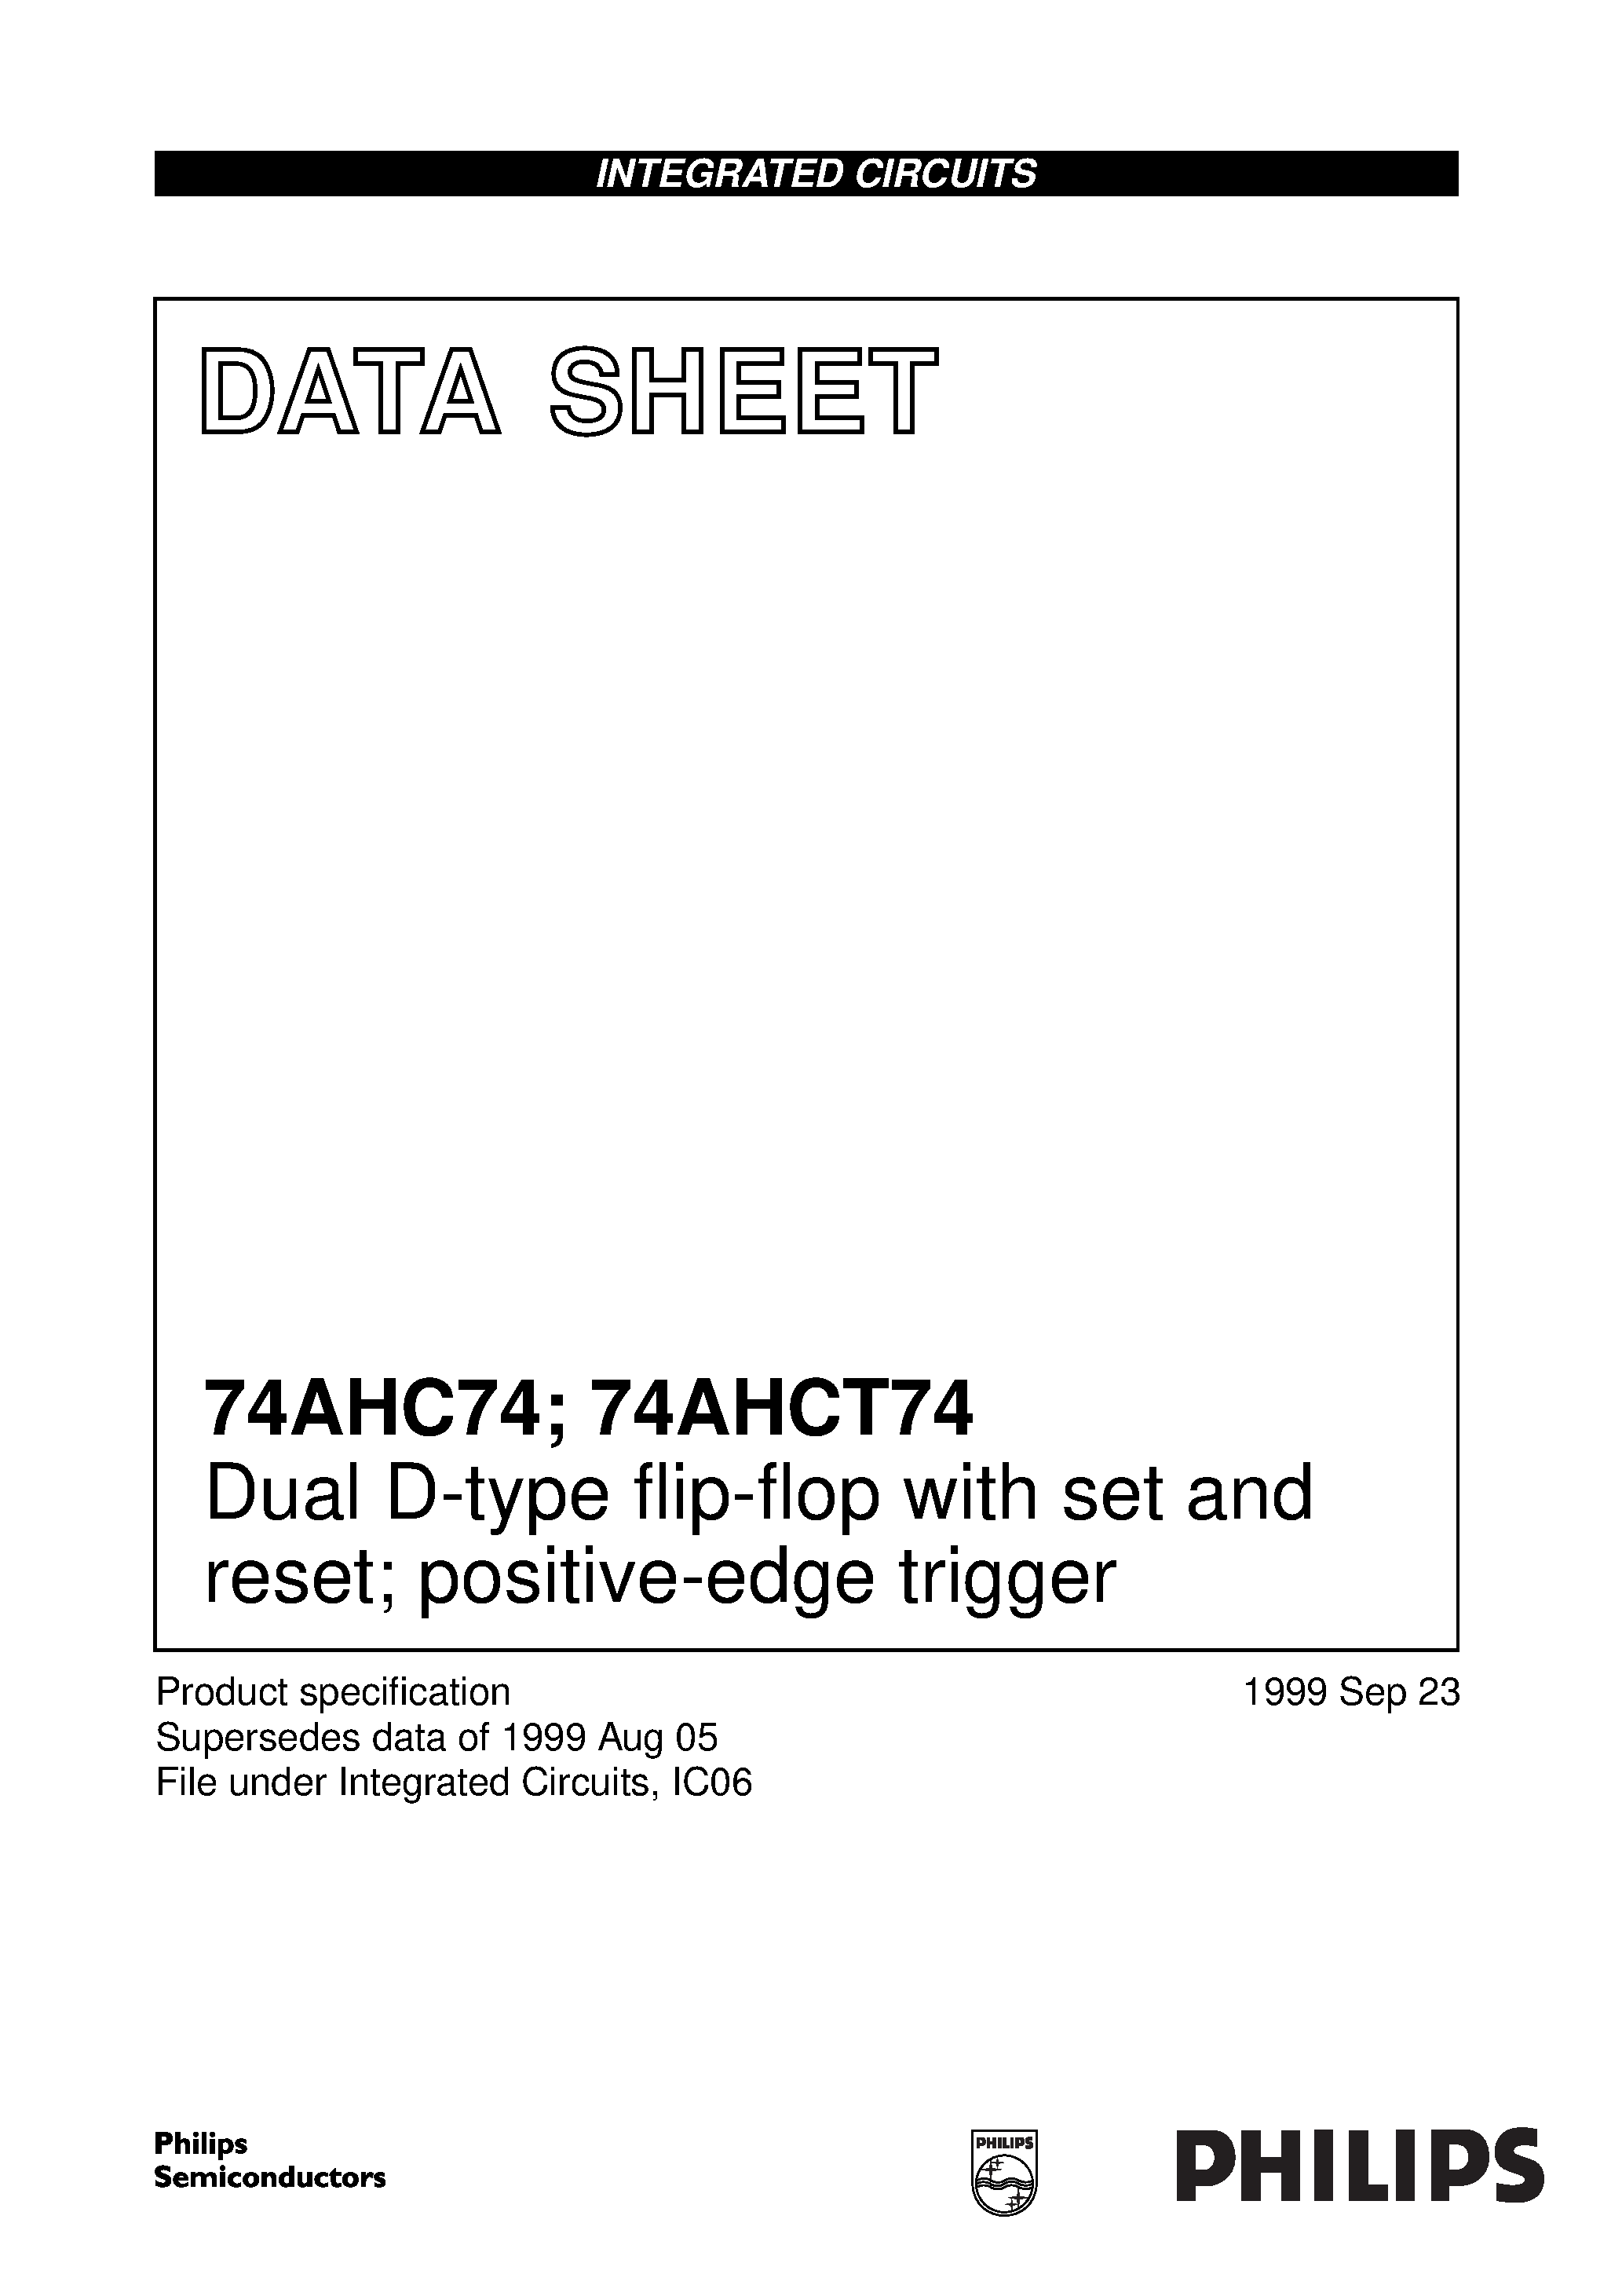 Datasheet 74AHCT74 - Dual D-type flip-flop with set and reset; positive-edge trigger page 1